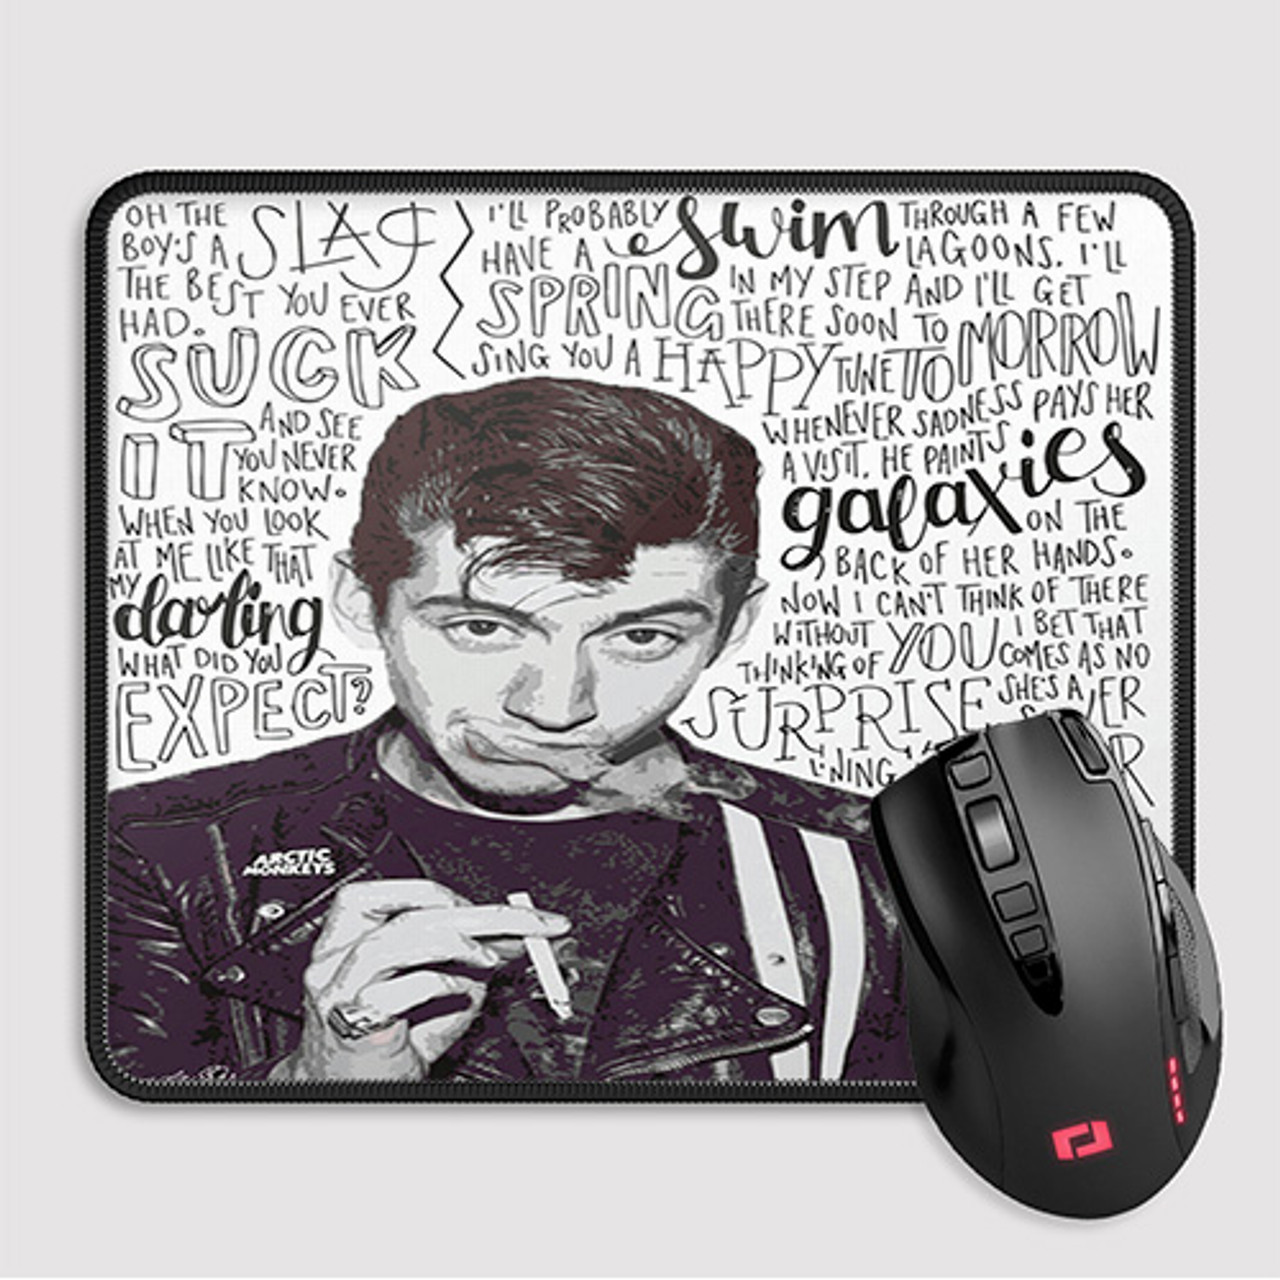 You got this mousepad with quotes